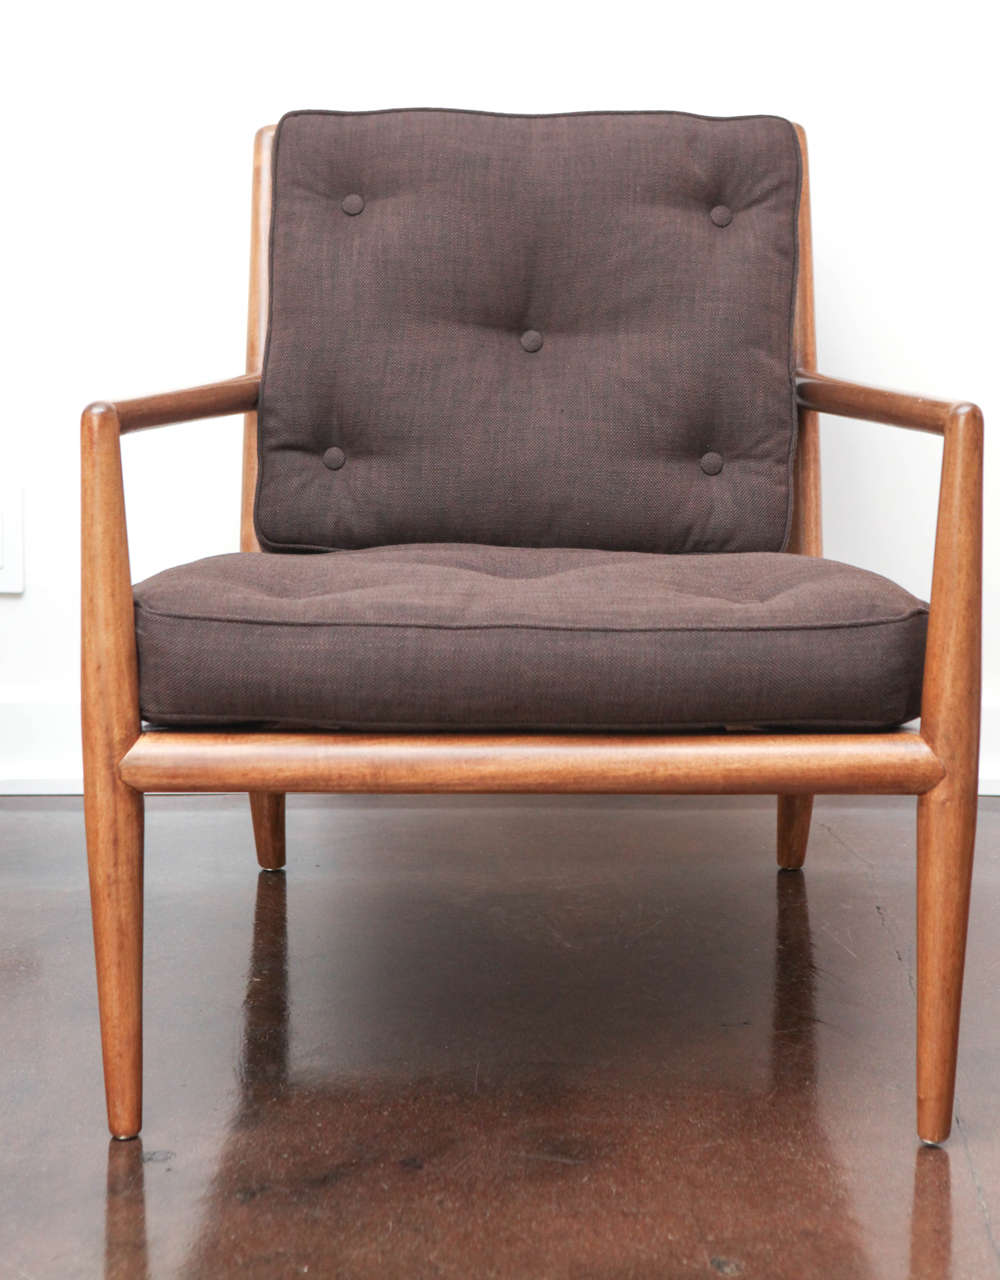 Classic walnut lounge chair, model WWZ, designed by T.H. Robsjohn-Gibbings.  Recently restored and reupholstered in a chocolate brown button-tufted pic-stitch cotton.